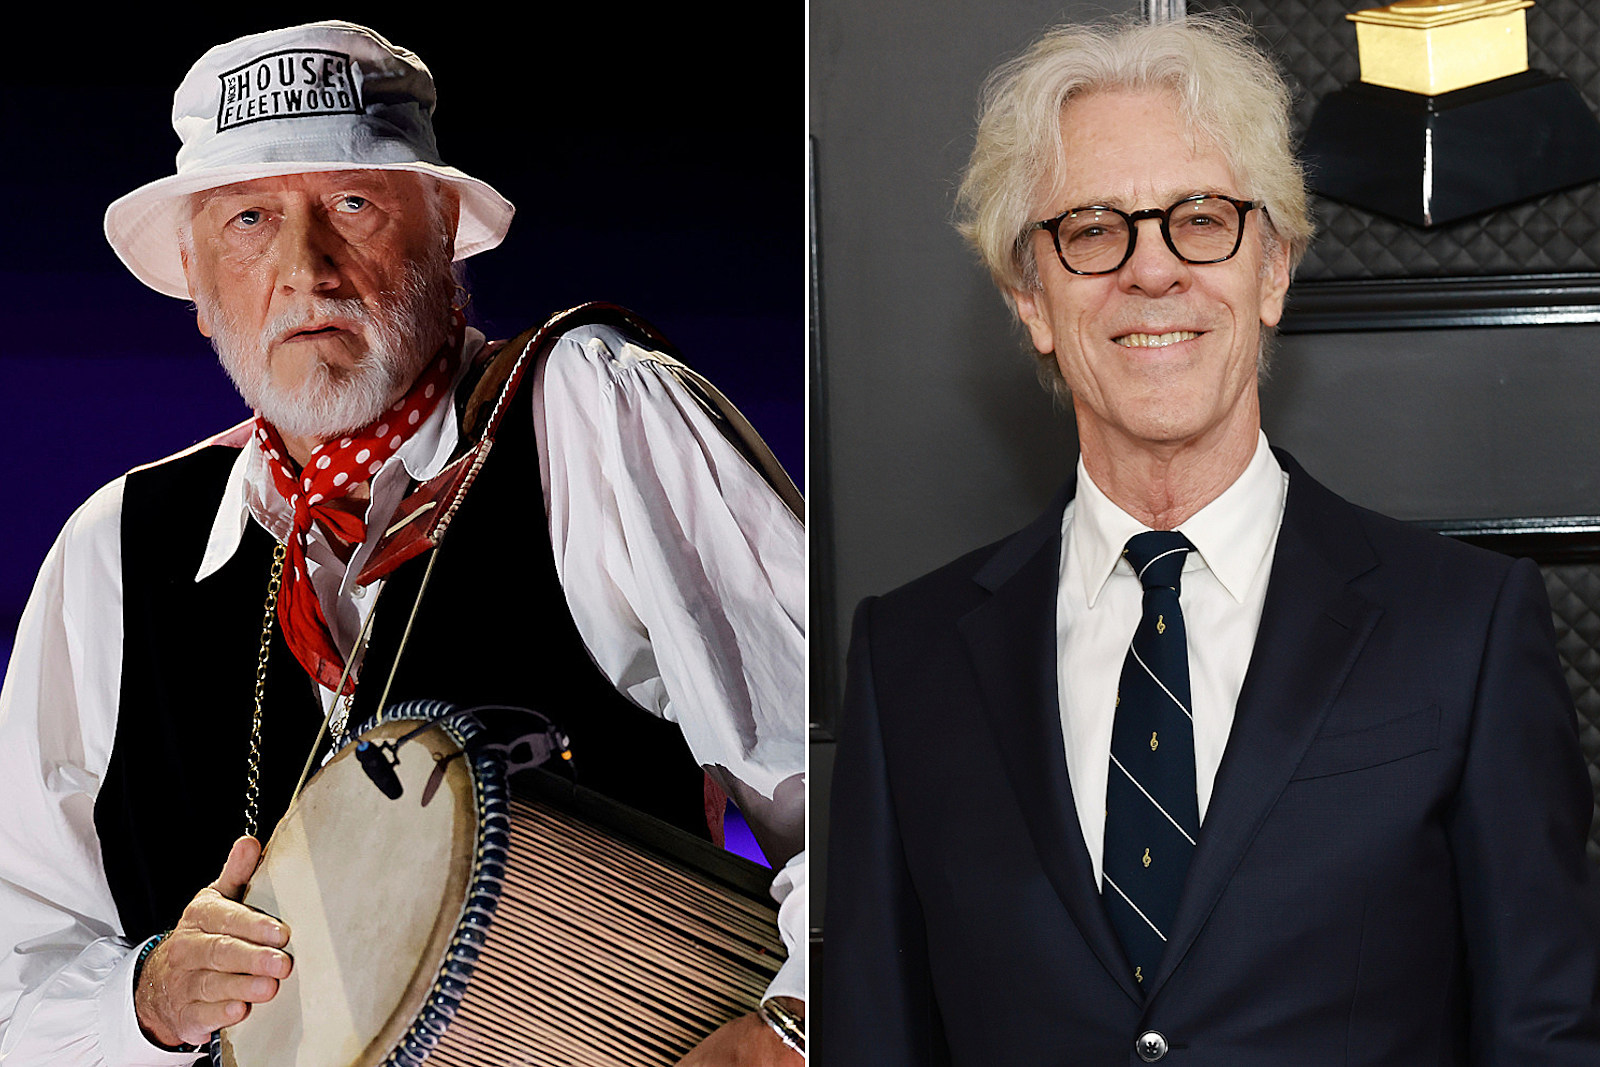 Mick Fleetwood and Stewart Copeland Lead ‘Maui Strong’ Performers